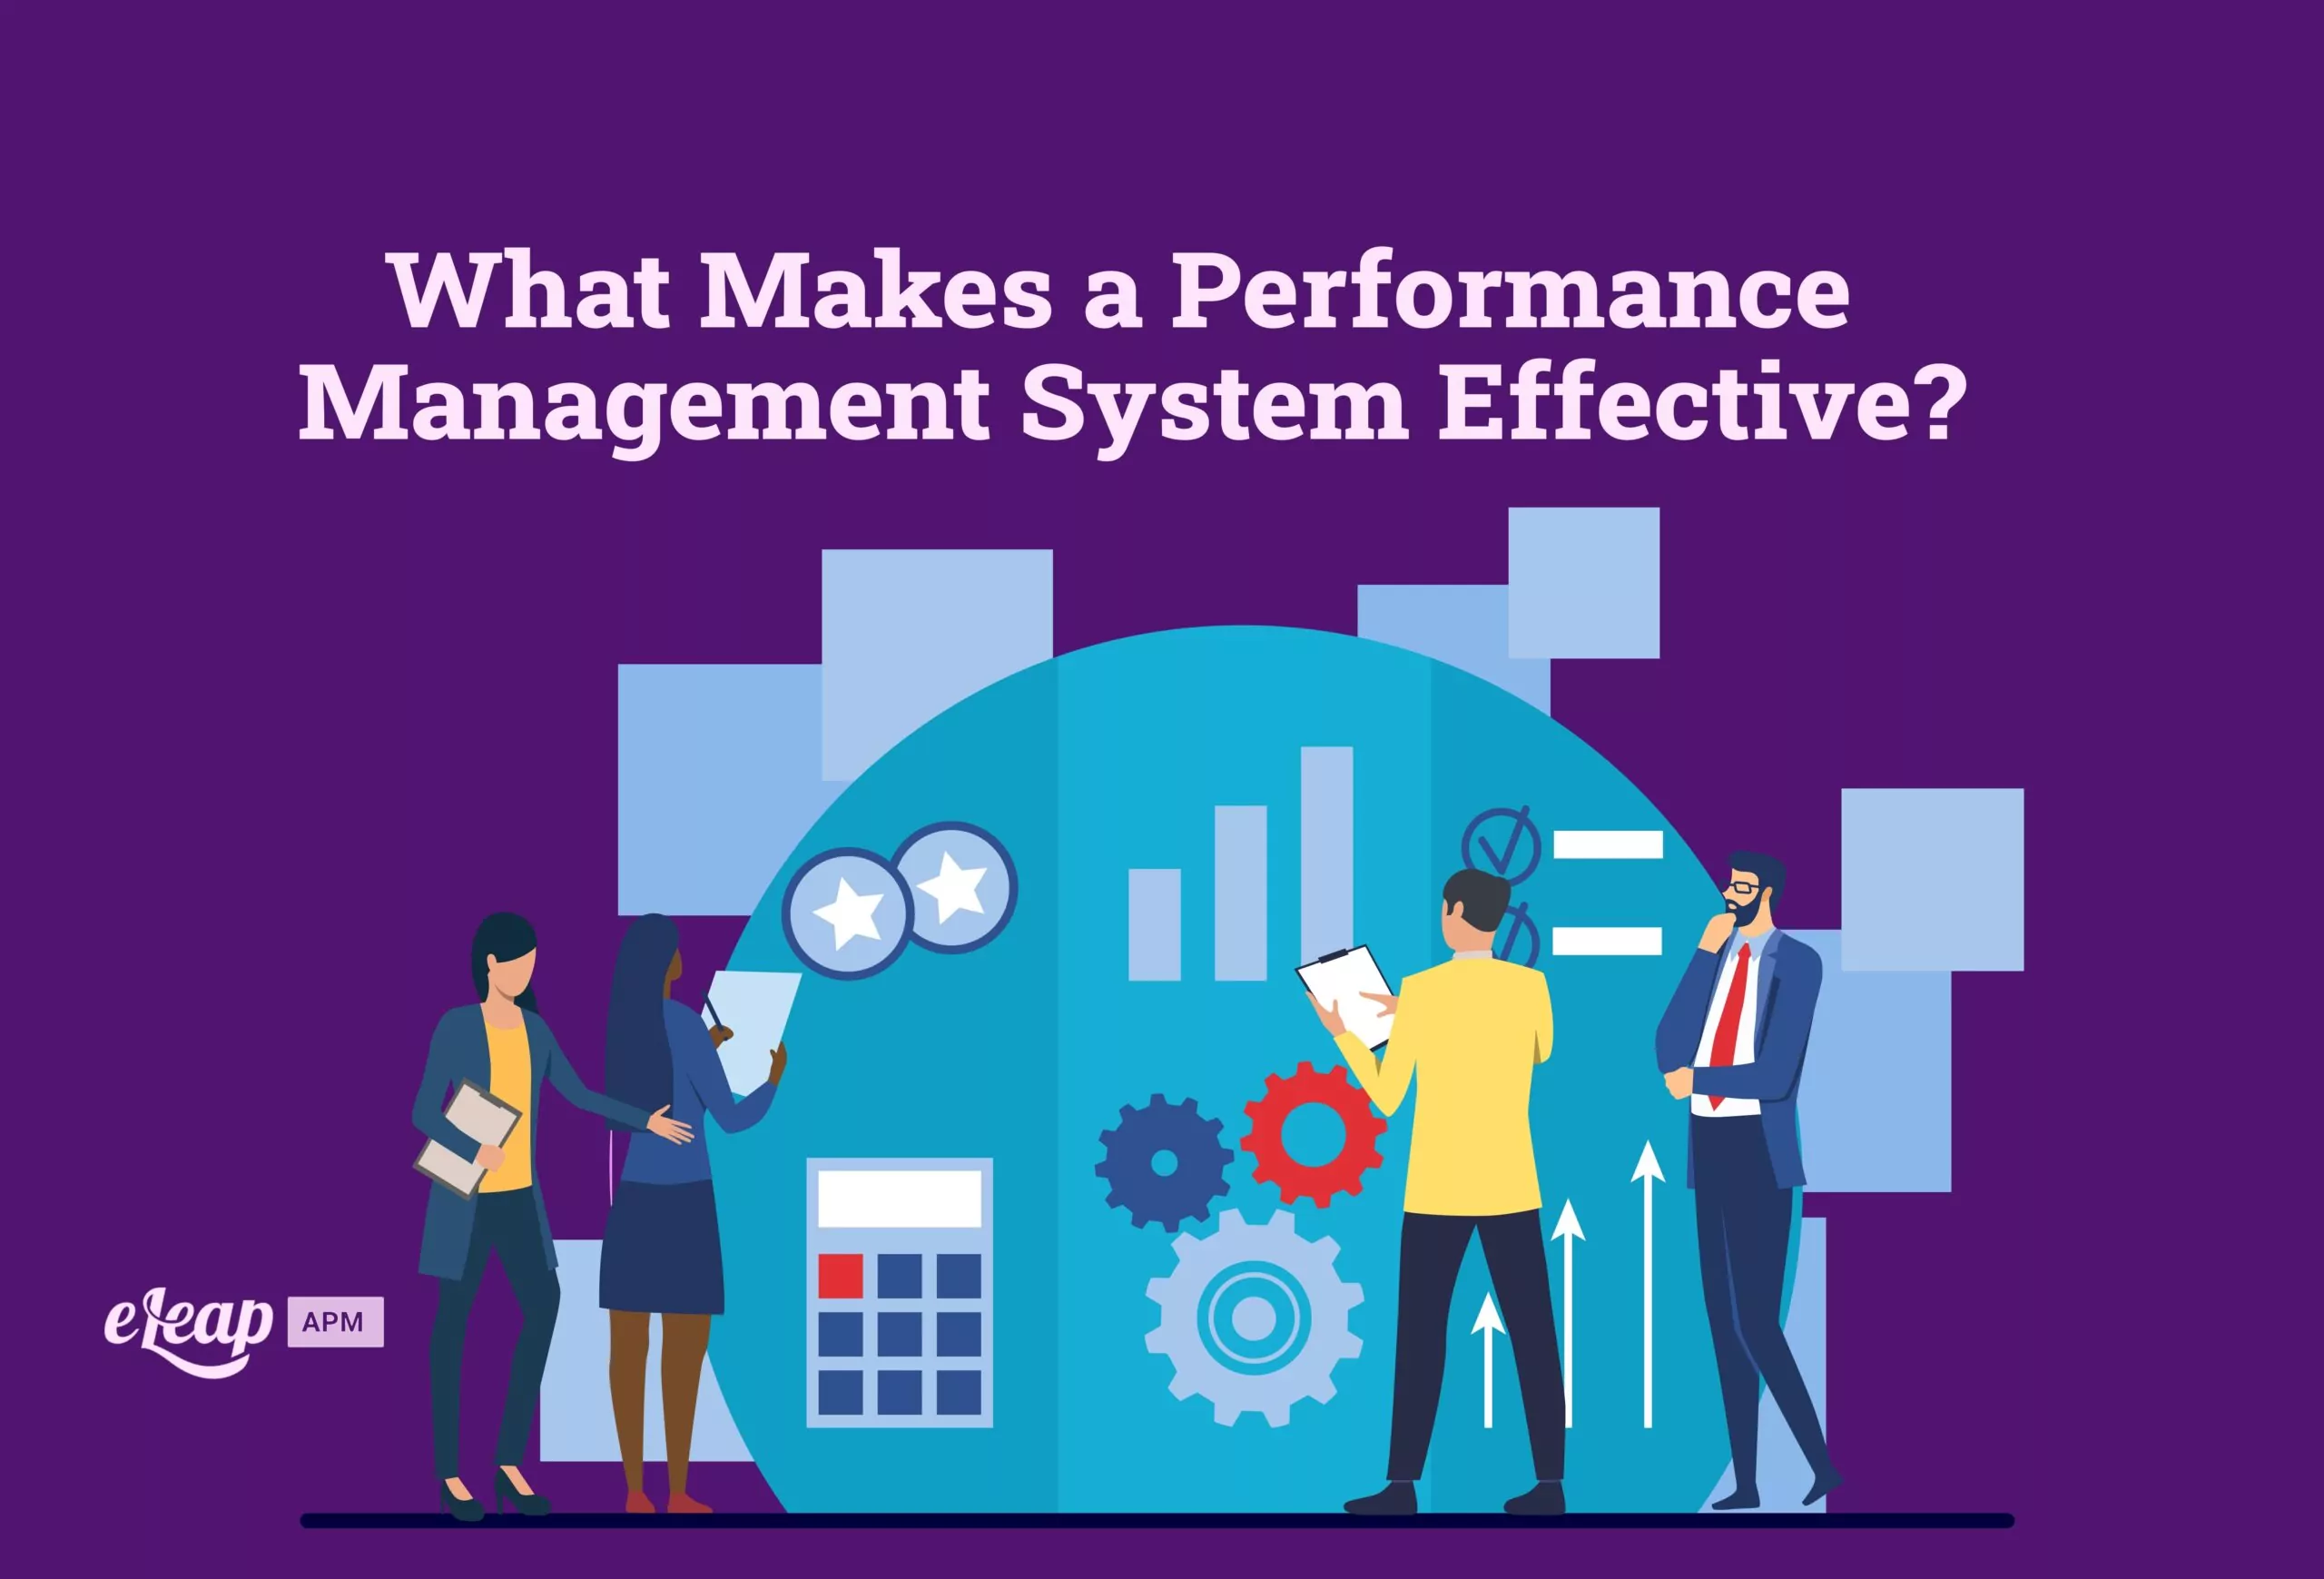 What Makes a Performance Management System Effective?